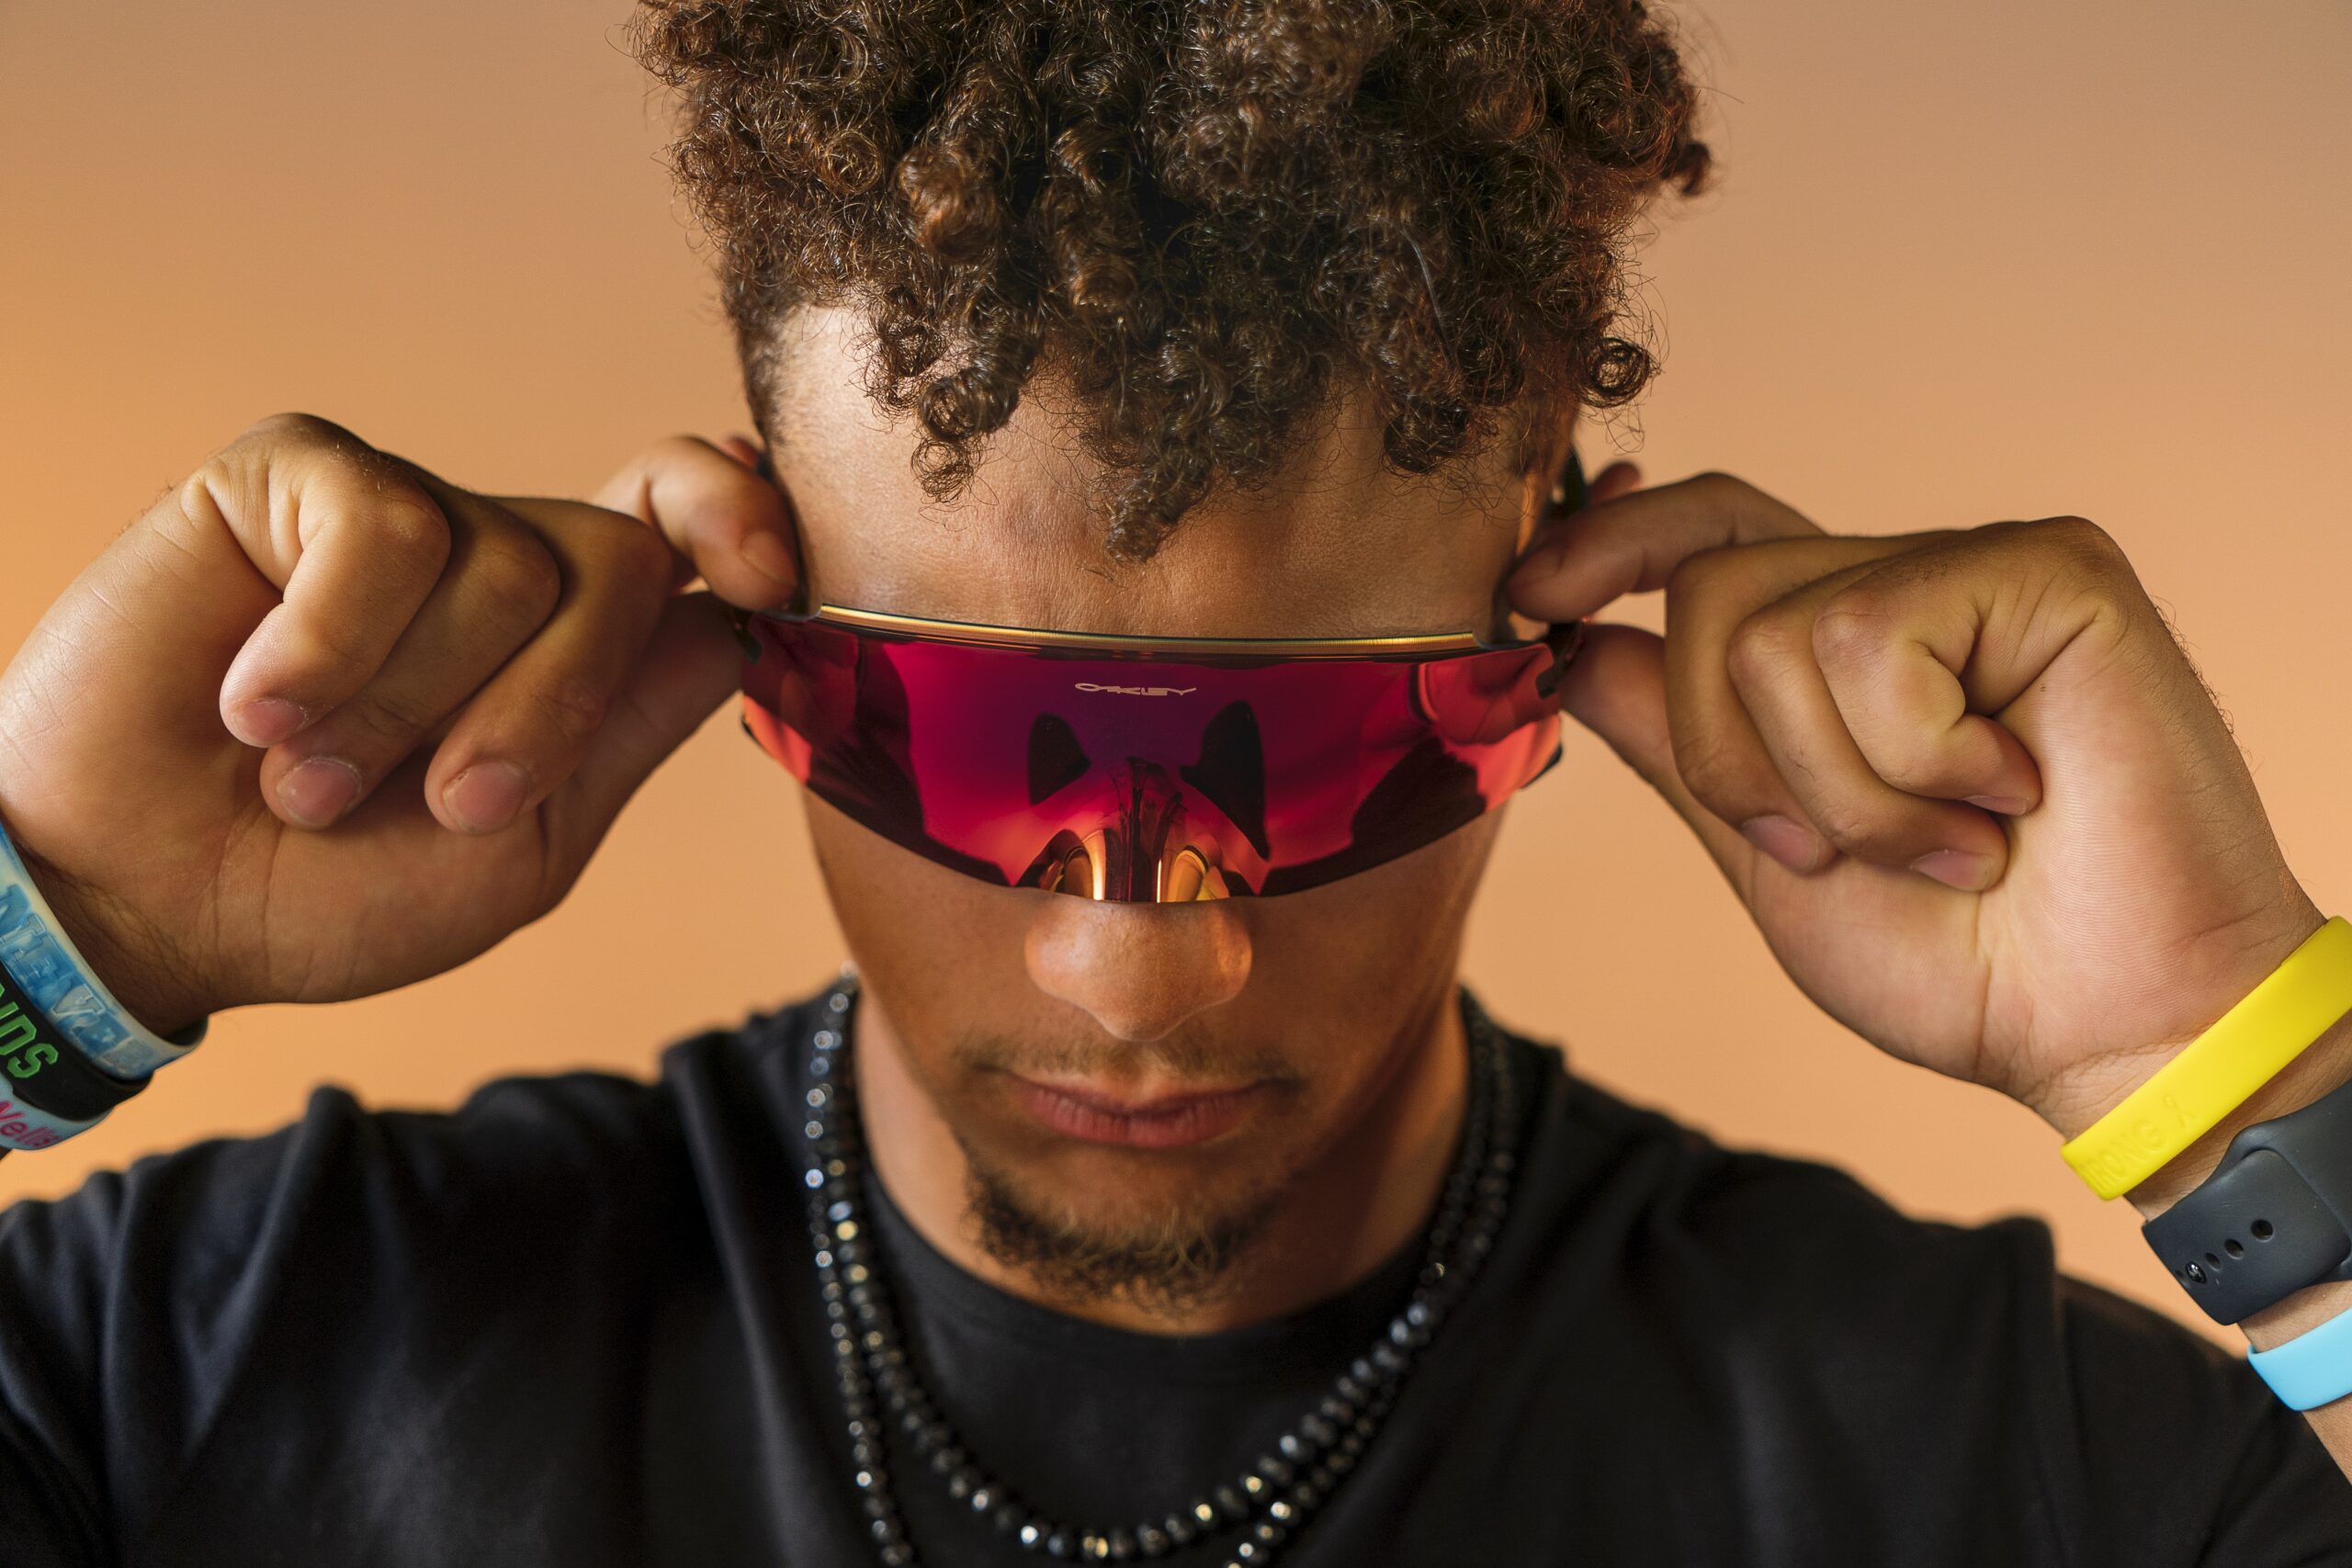 A Guide to the Best Oakley Sunglasses